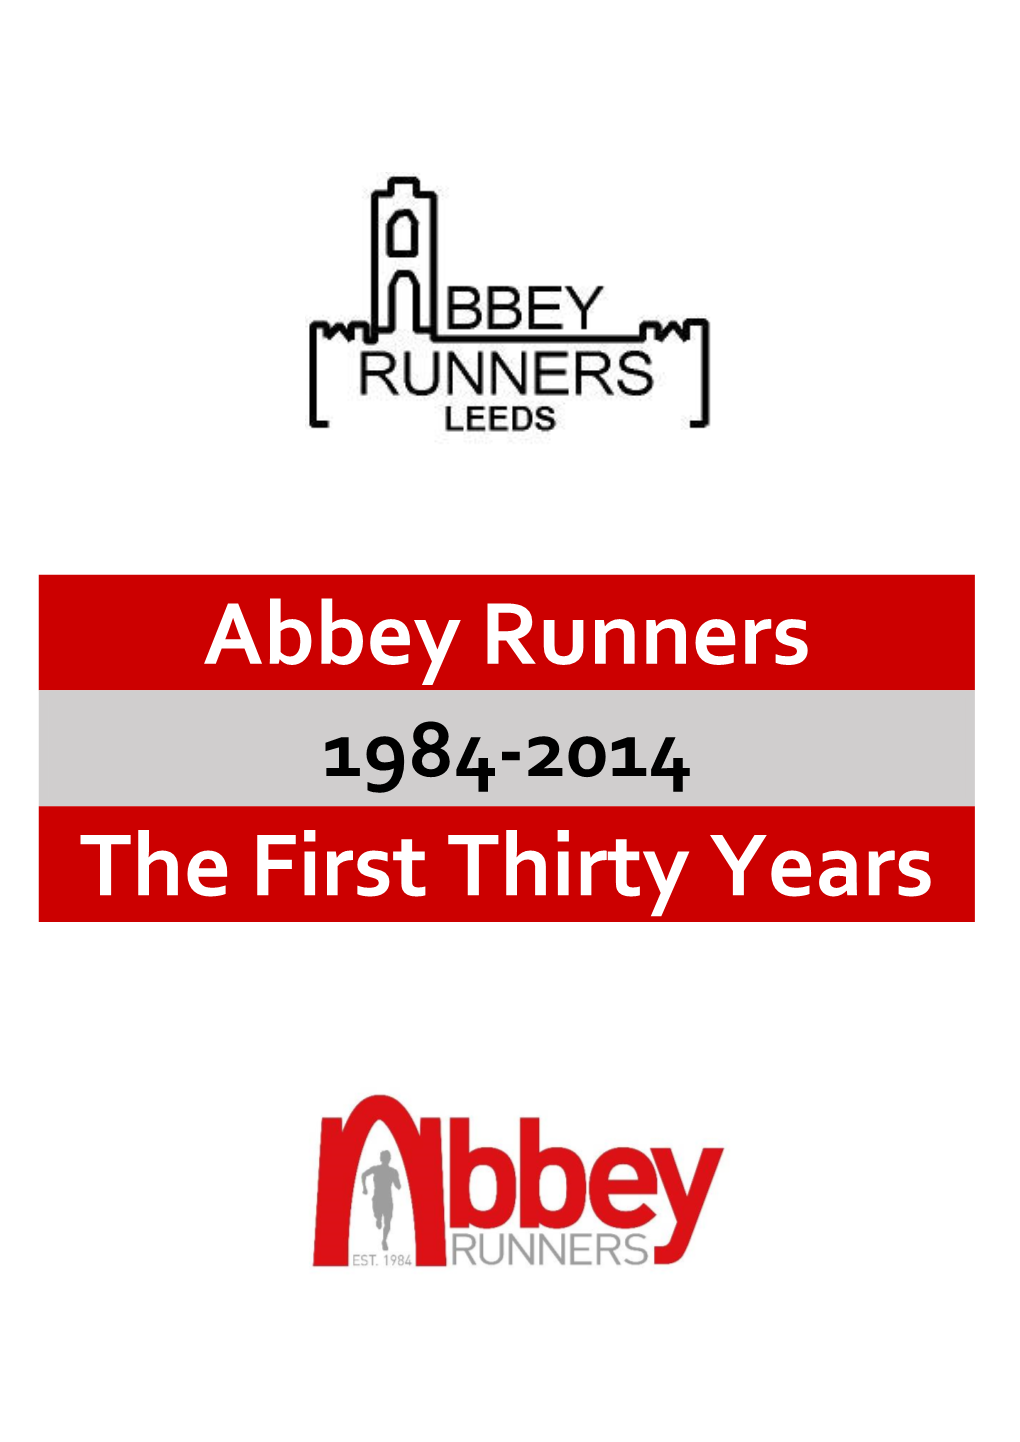 Here Is Also a History of Abbey Runners